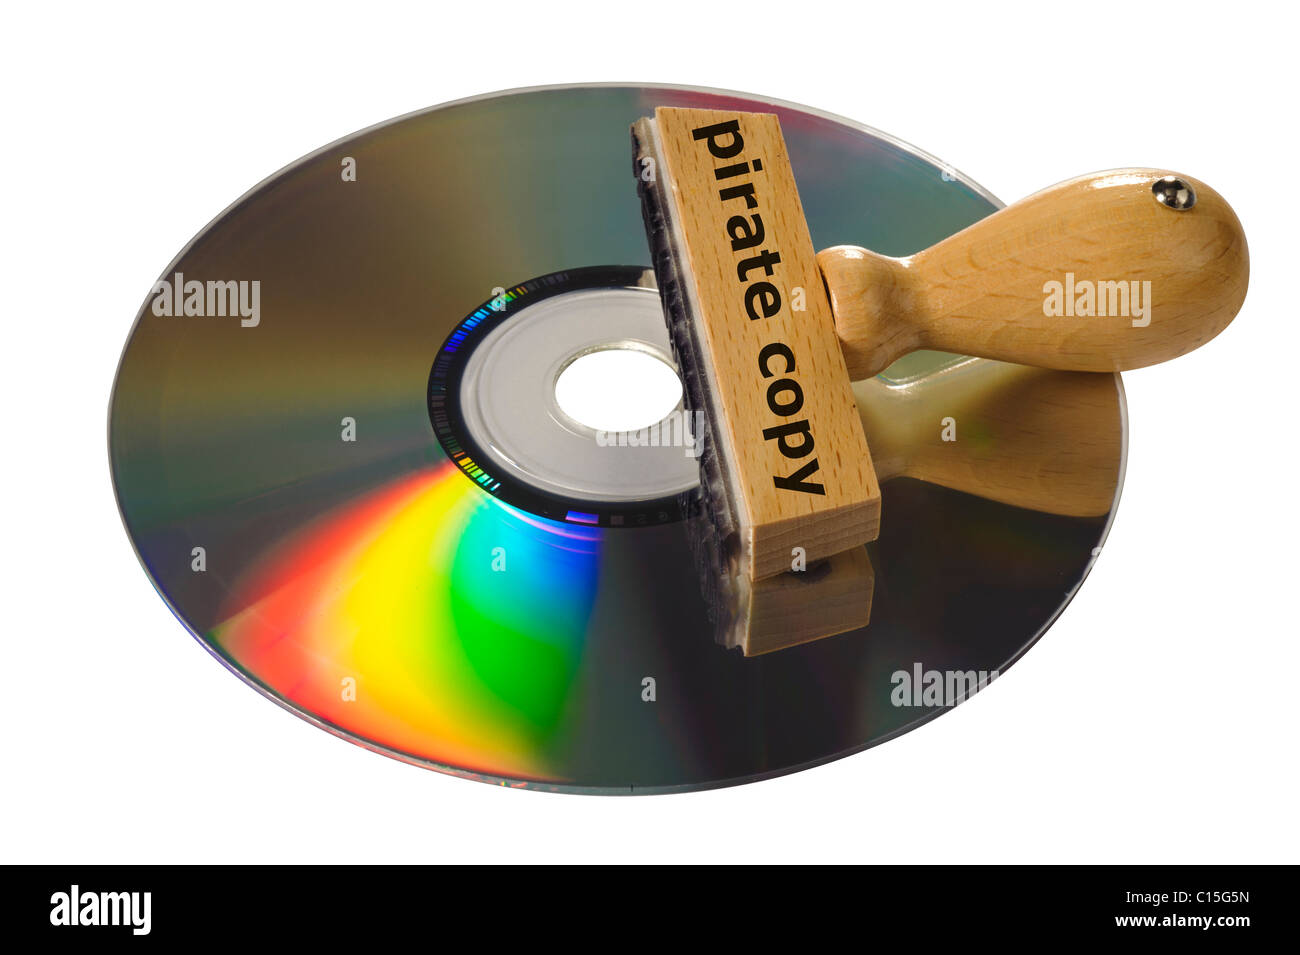 pirate copy of software or video cd Stock Photo